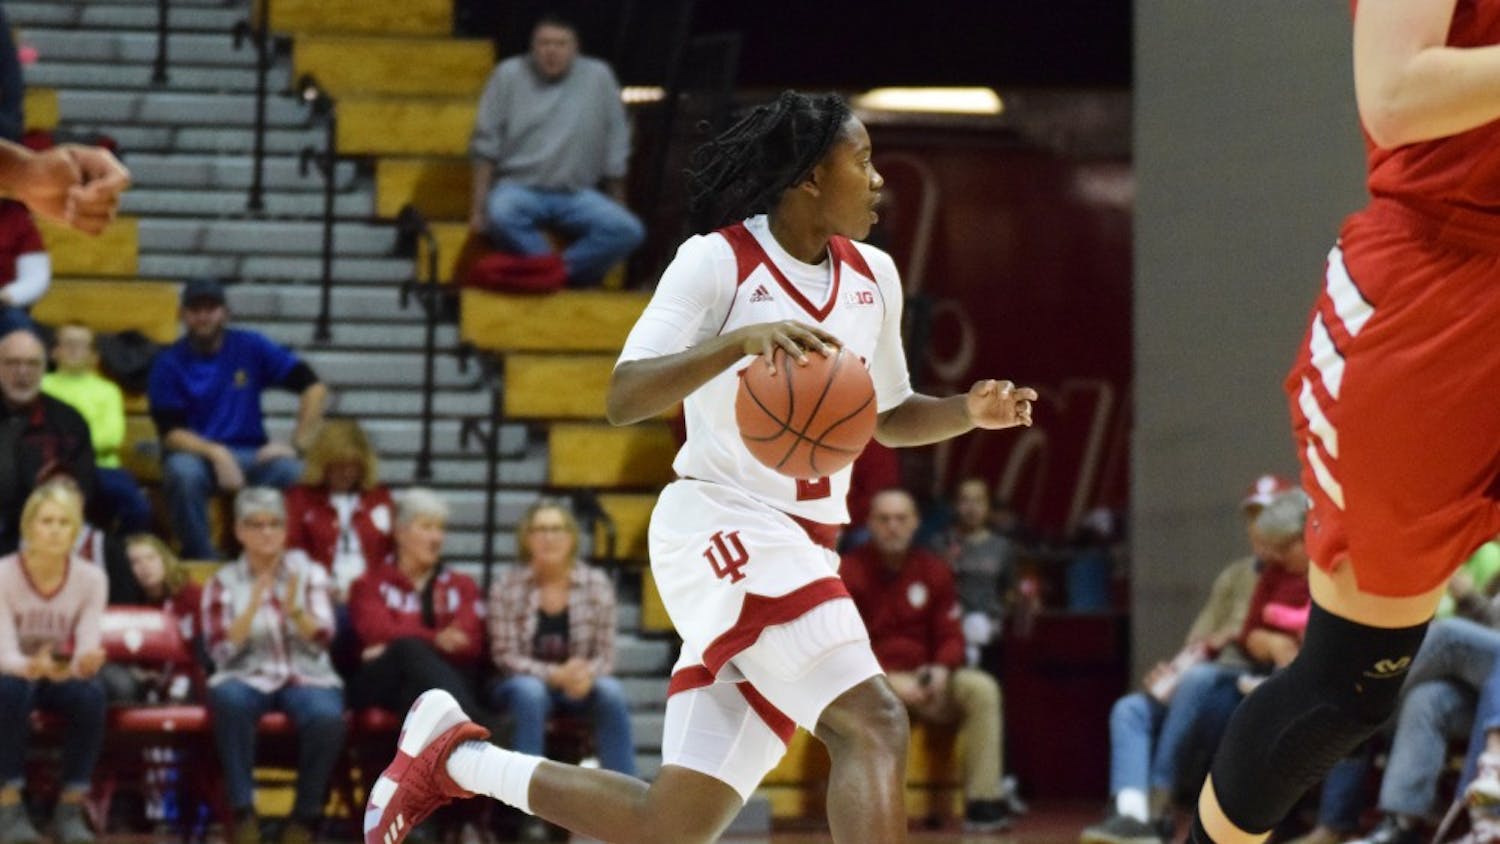 Freshman guard Keyanna Warthen dribbles the ball while waiting for an opportunity to pass at the game against Western Kentucky on Nov. 17 at Simon Skjodt Assembly Hall. IU went 1-1 this past weekend at a tournament in California.&nbsp;